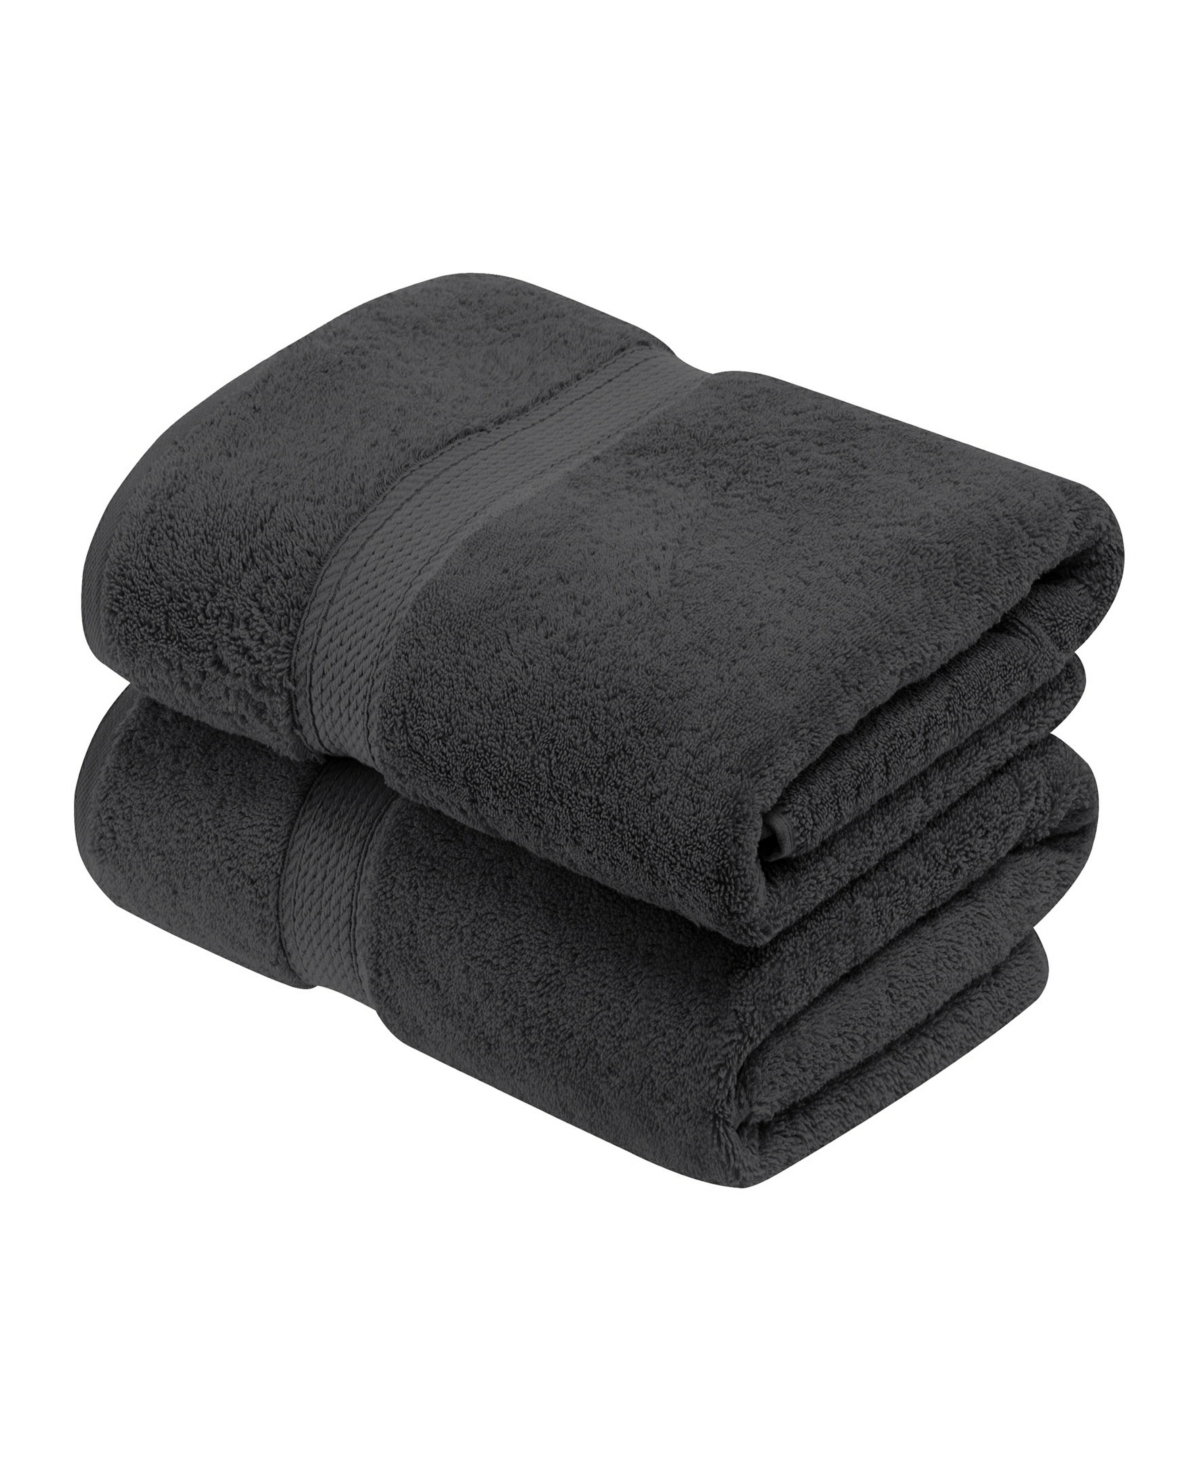 Superior Highly Absorbent Egyptian Cotton 2-piece Ultra Plush Solid Bath Towel Set Bedding In Charcoal